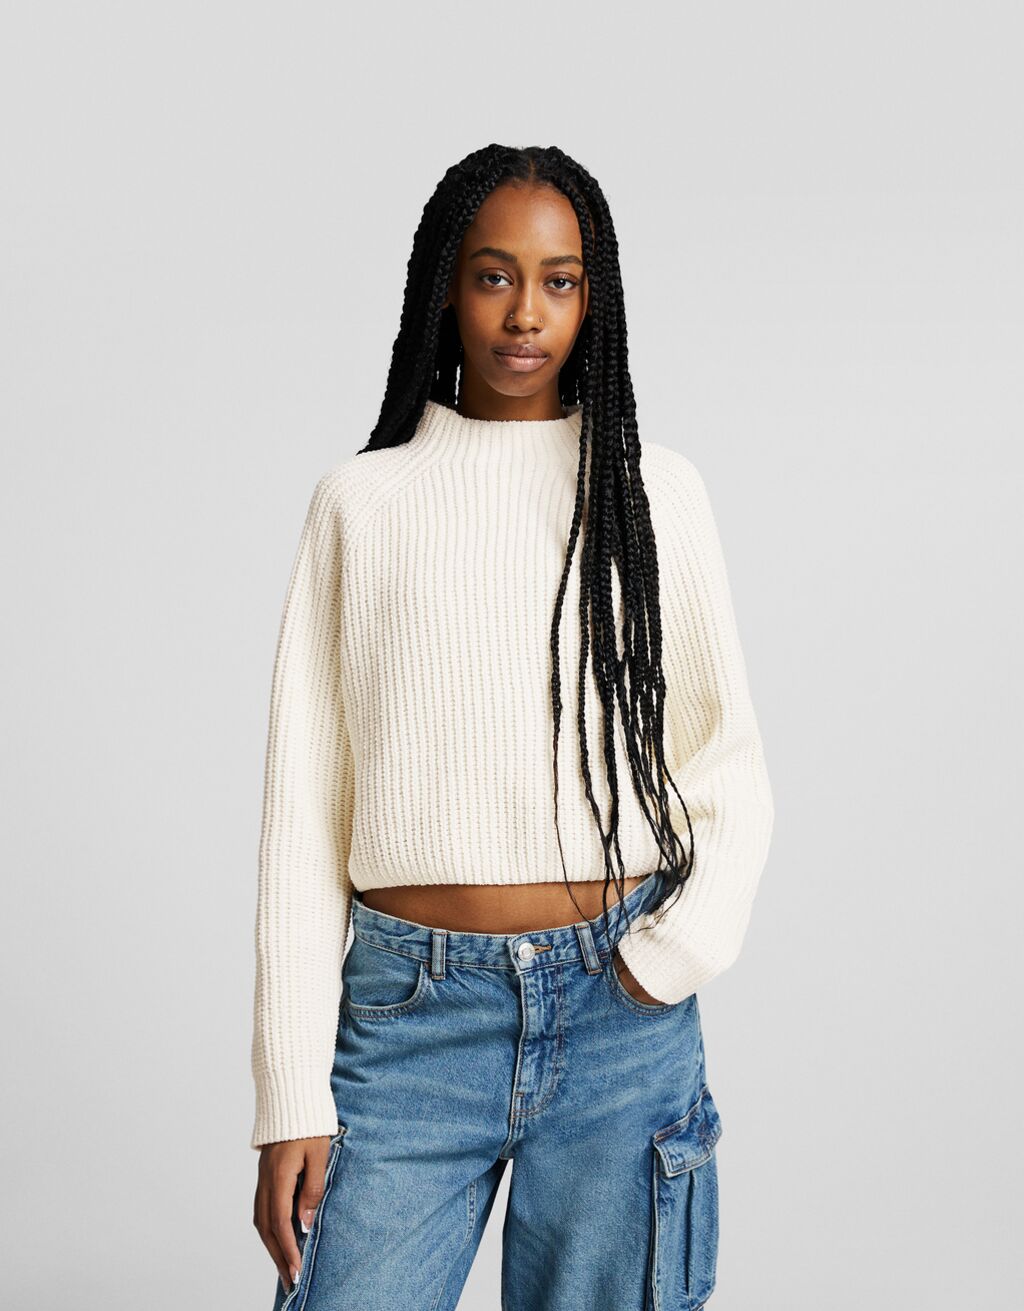 High neck chenille sweater - Sweatshirts and sweaters - BSK Teen